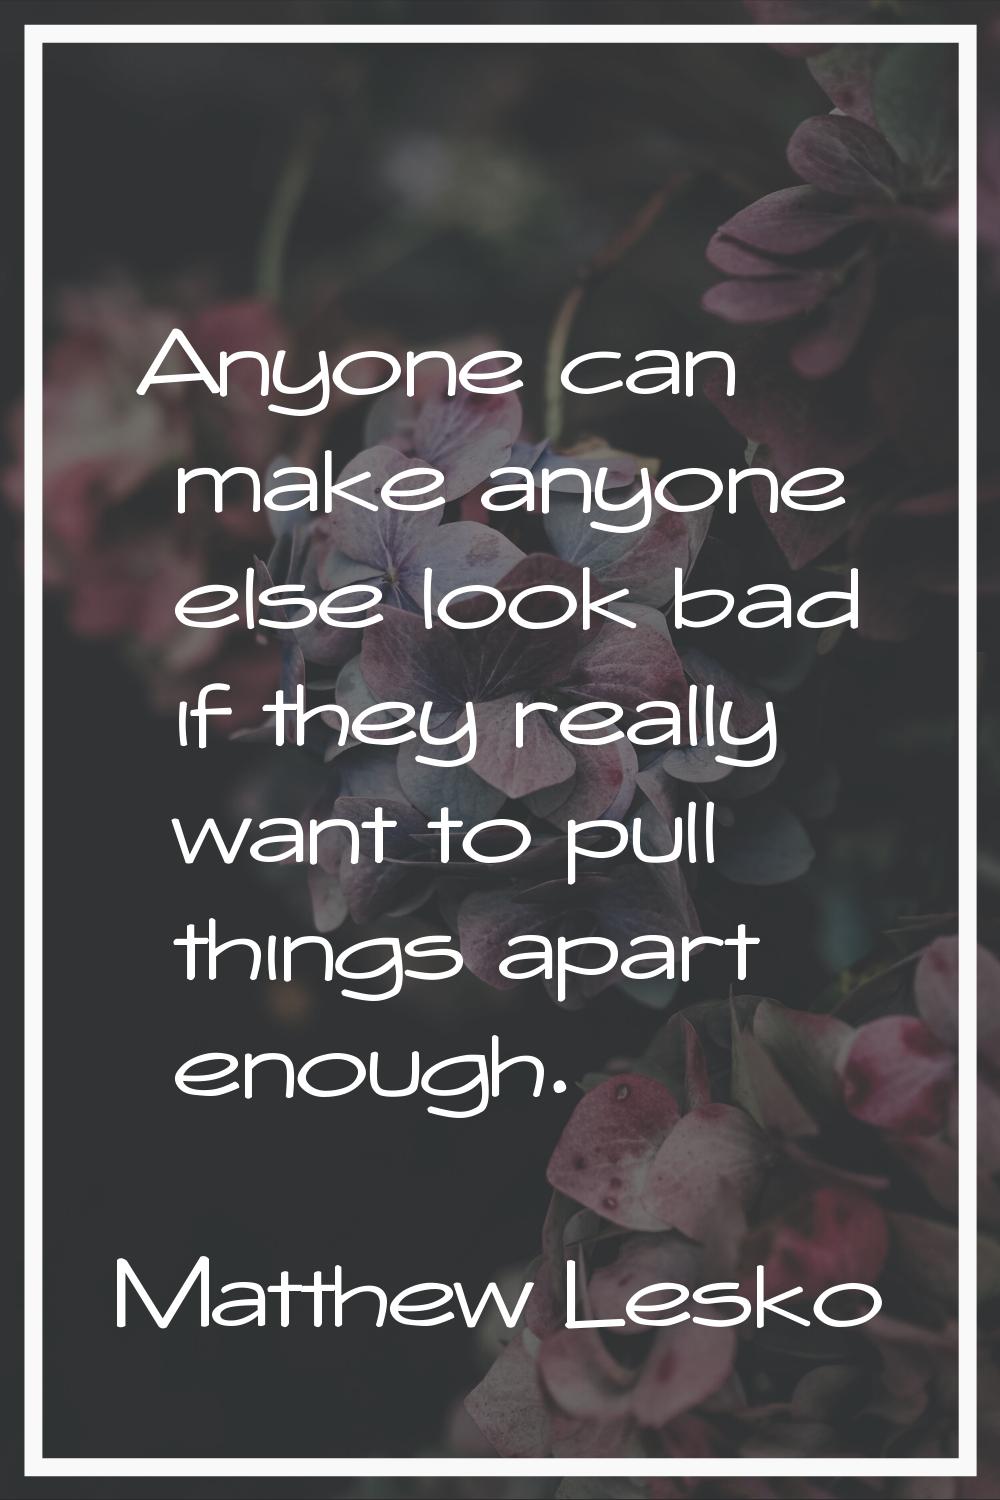 Anyone can make anyone else look bad if they really want to pull things apart enough.